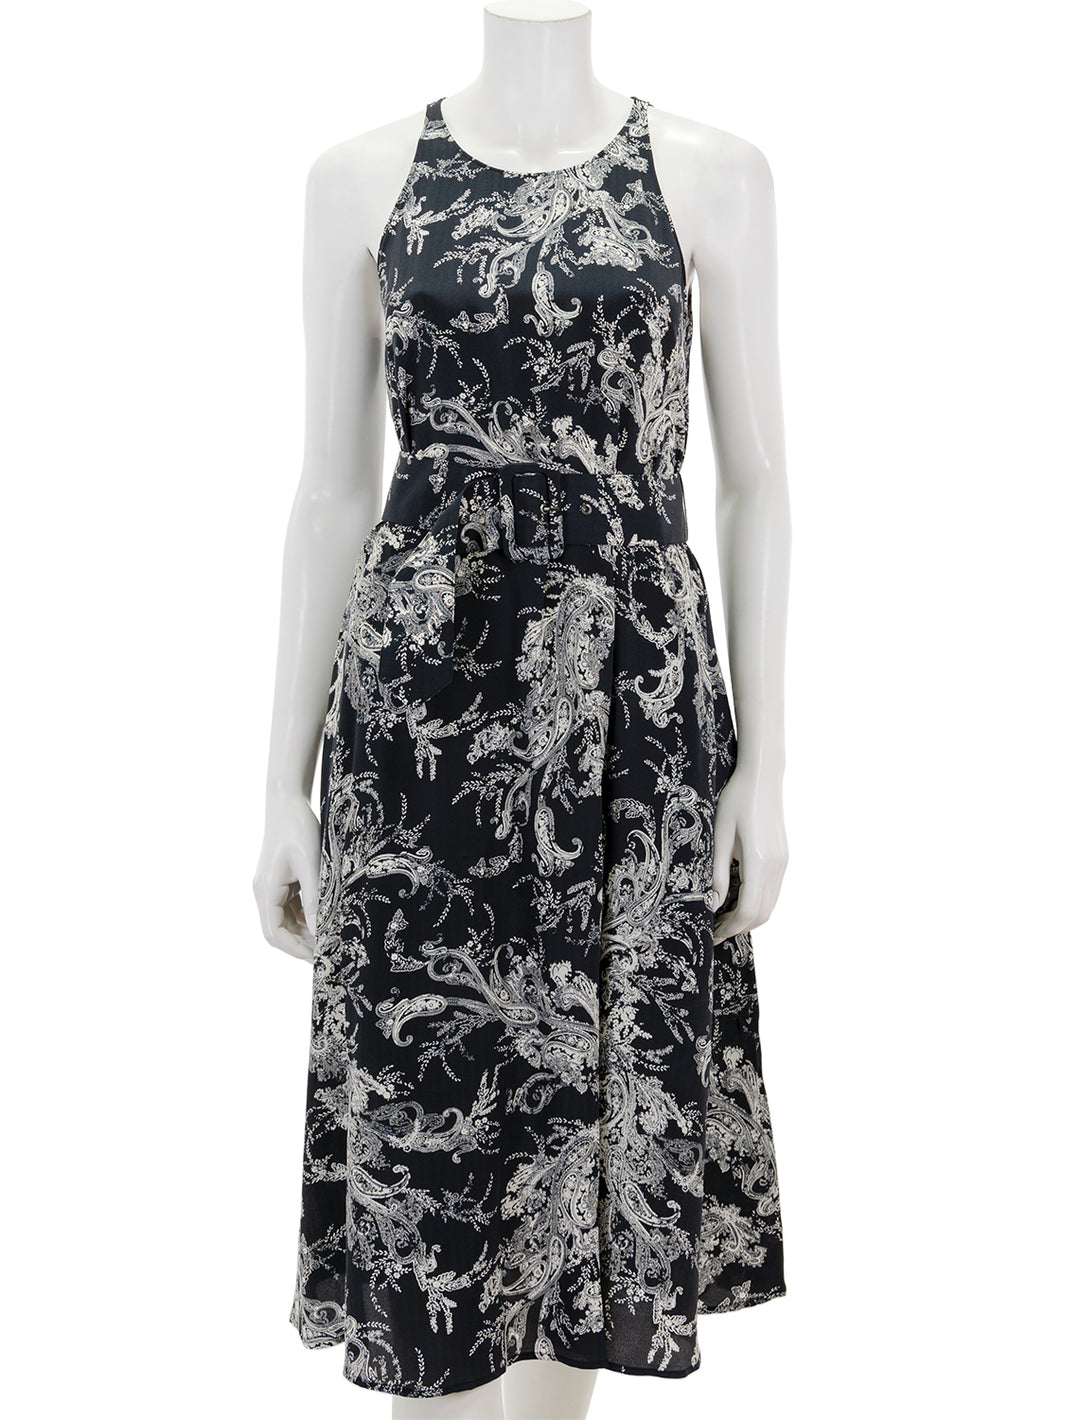 Front view of L'agence's vivian dress in sketch paisley print.